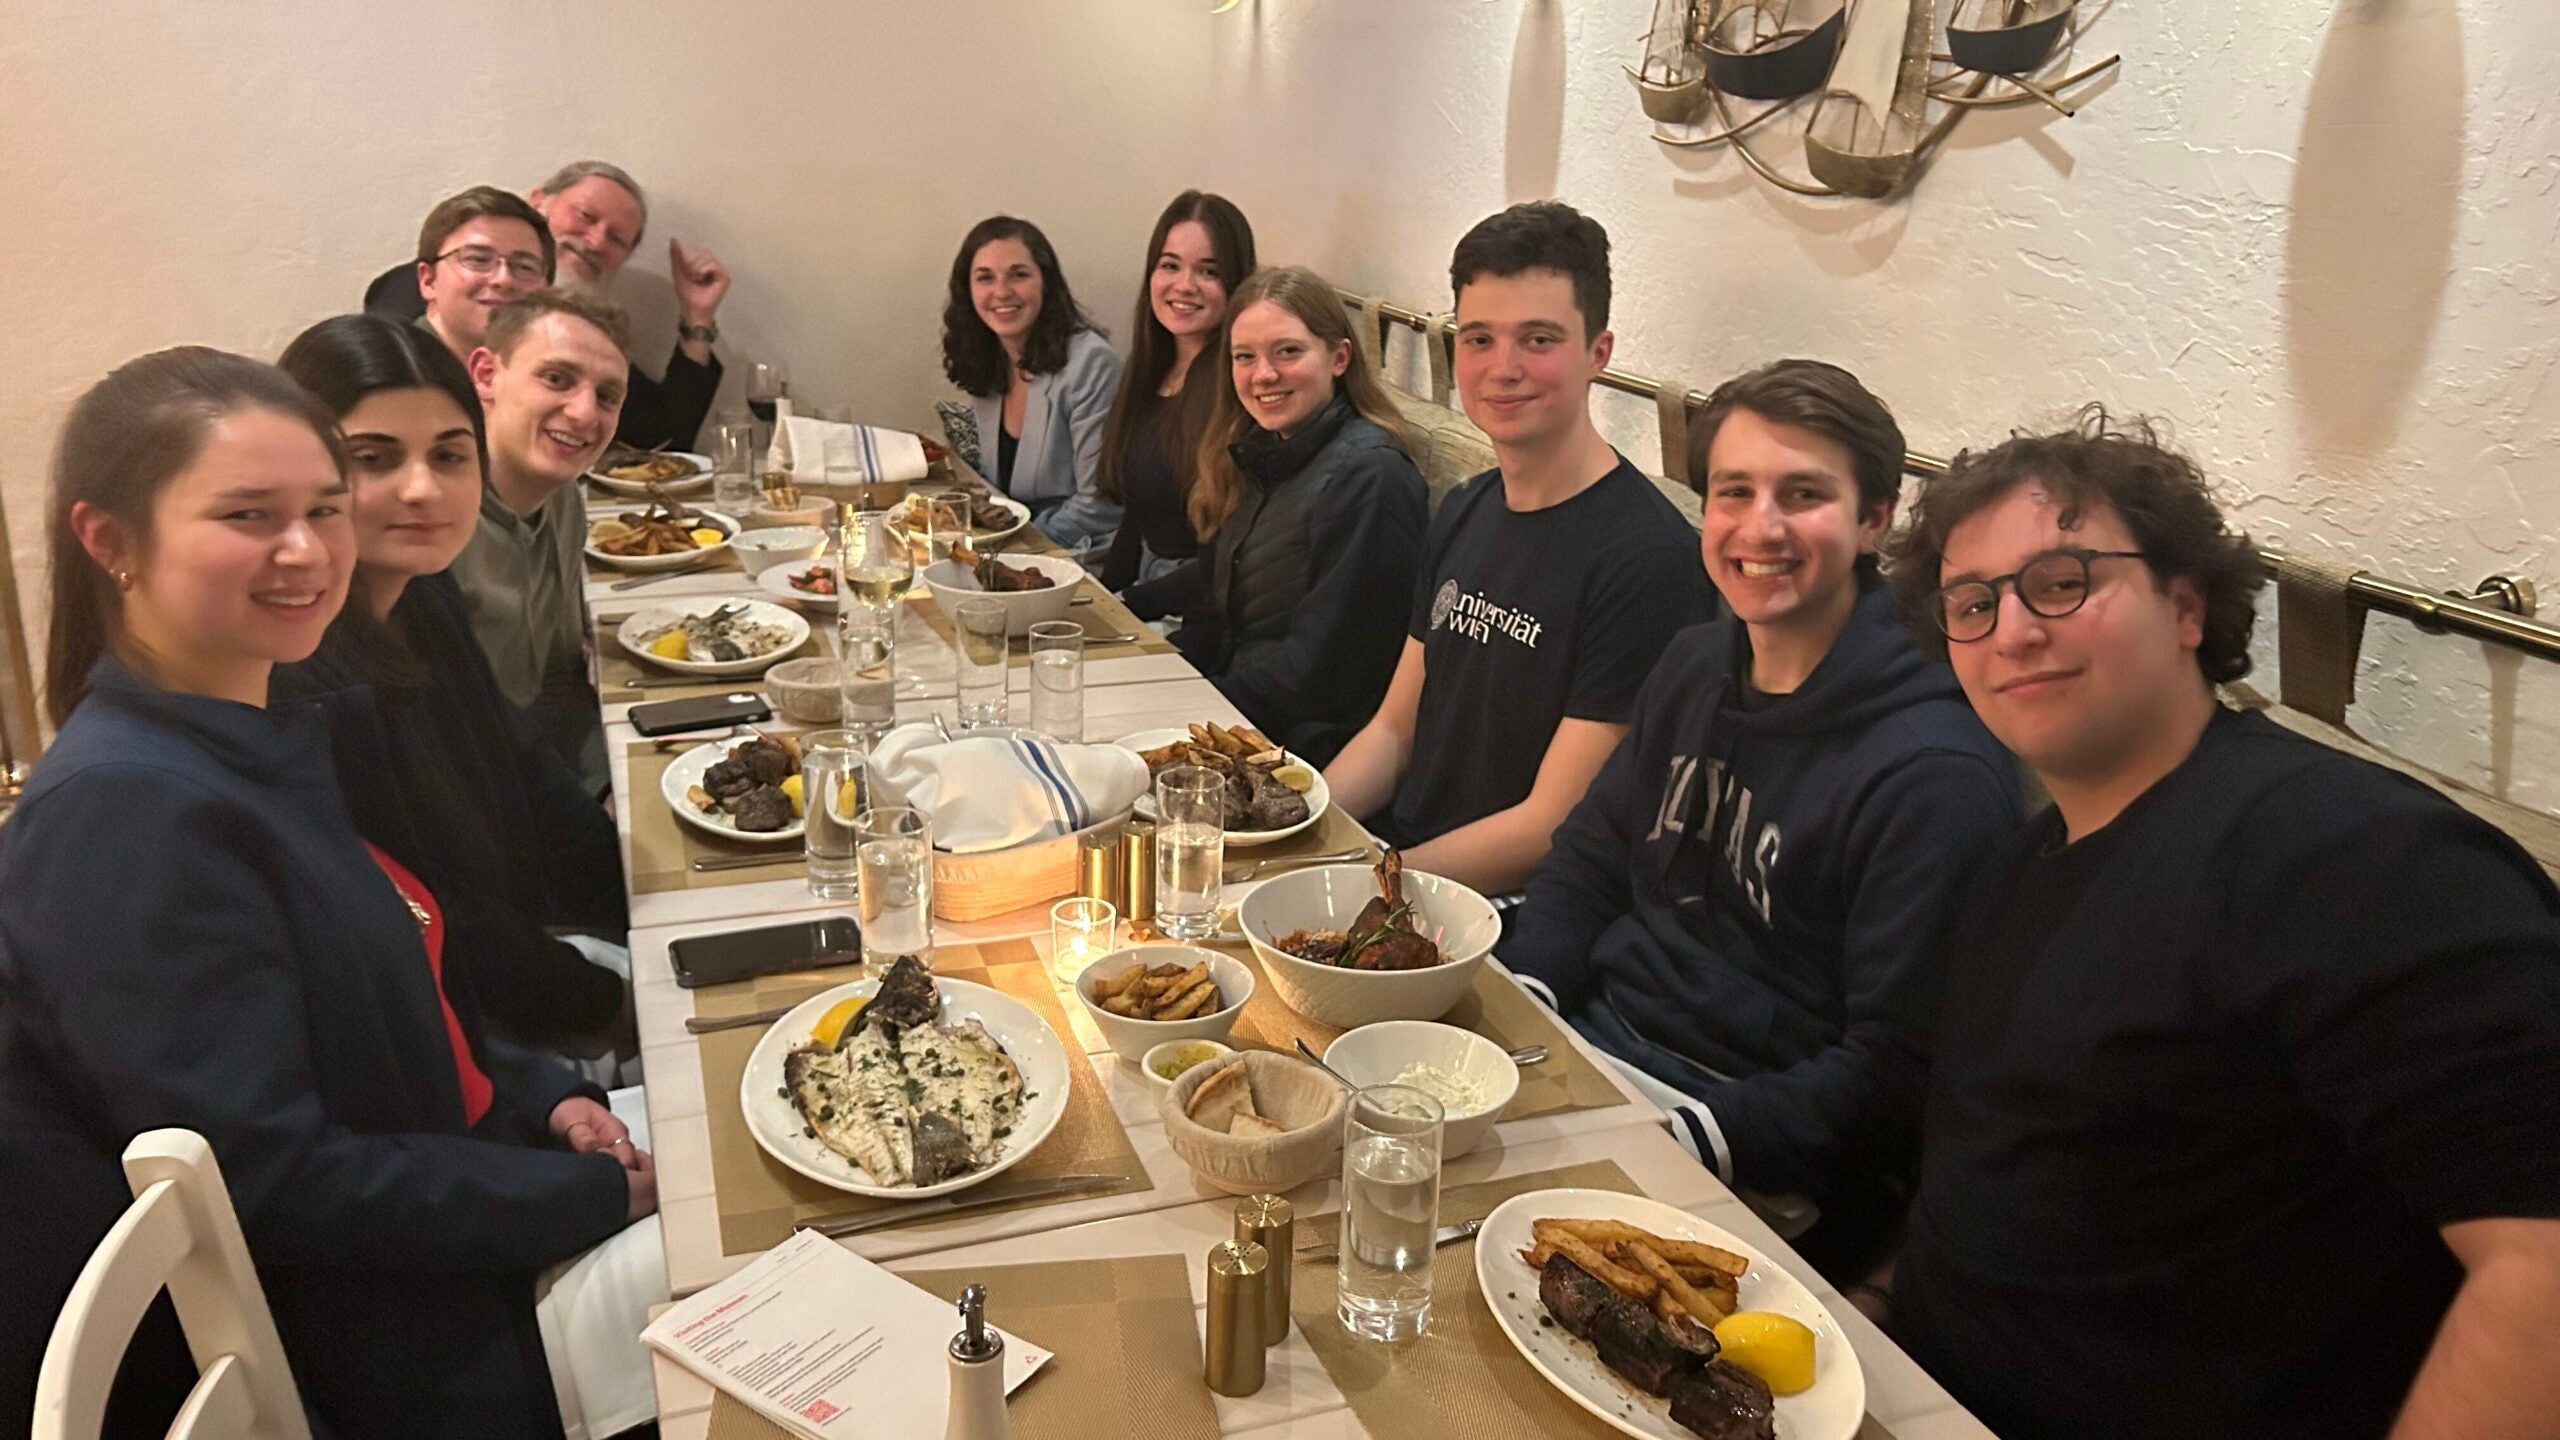 Nine students and trip chaperones, Fr Pratt and Becky Hay sitting at a dining table with plates of food in front of each person. 